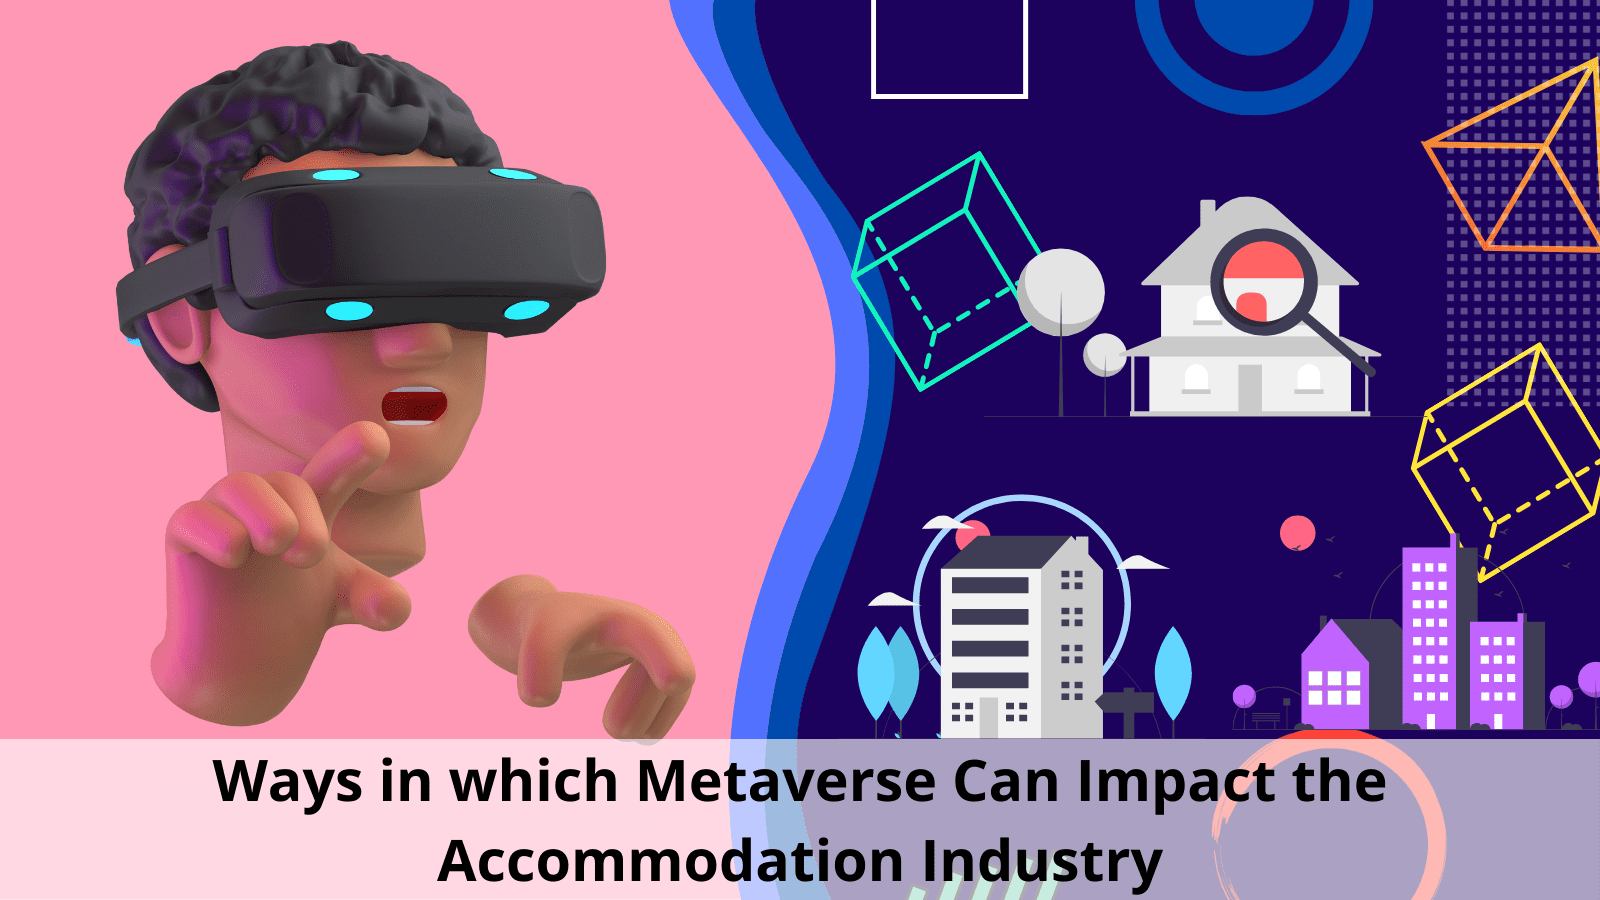 3 Ways Metaverse Can Impact the Accommodation Industry